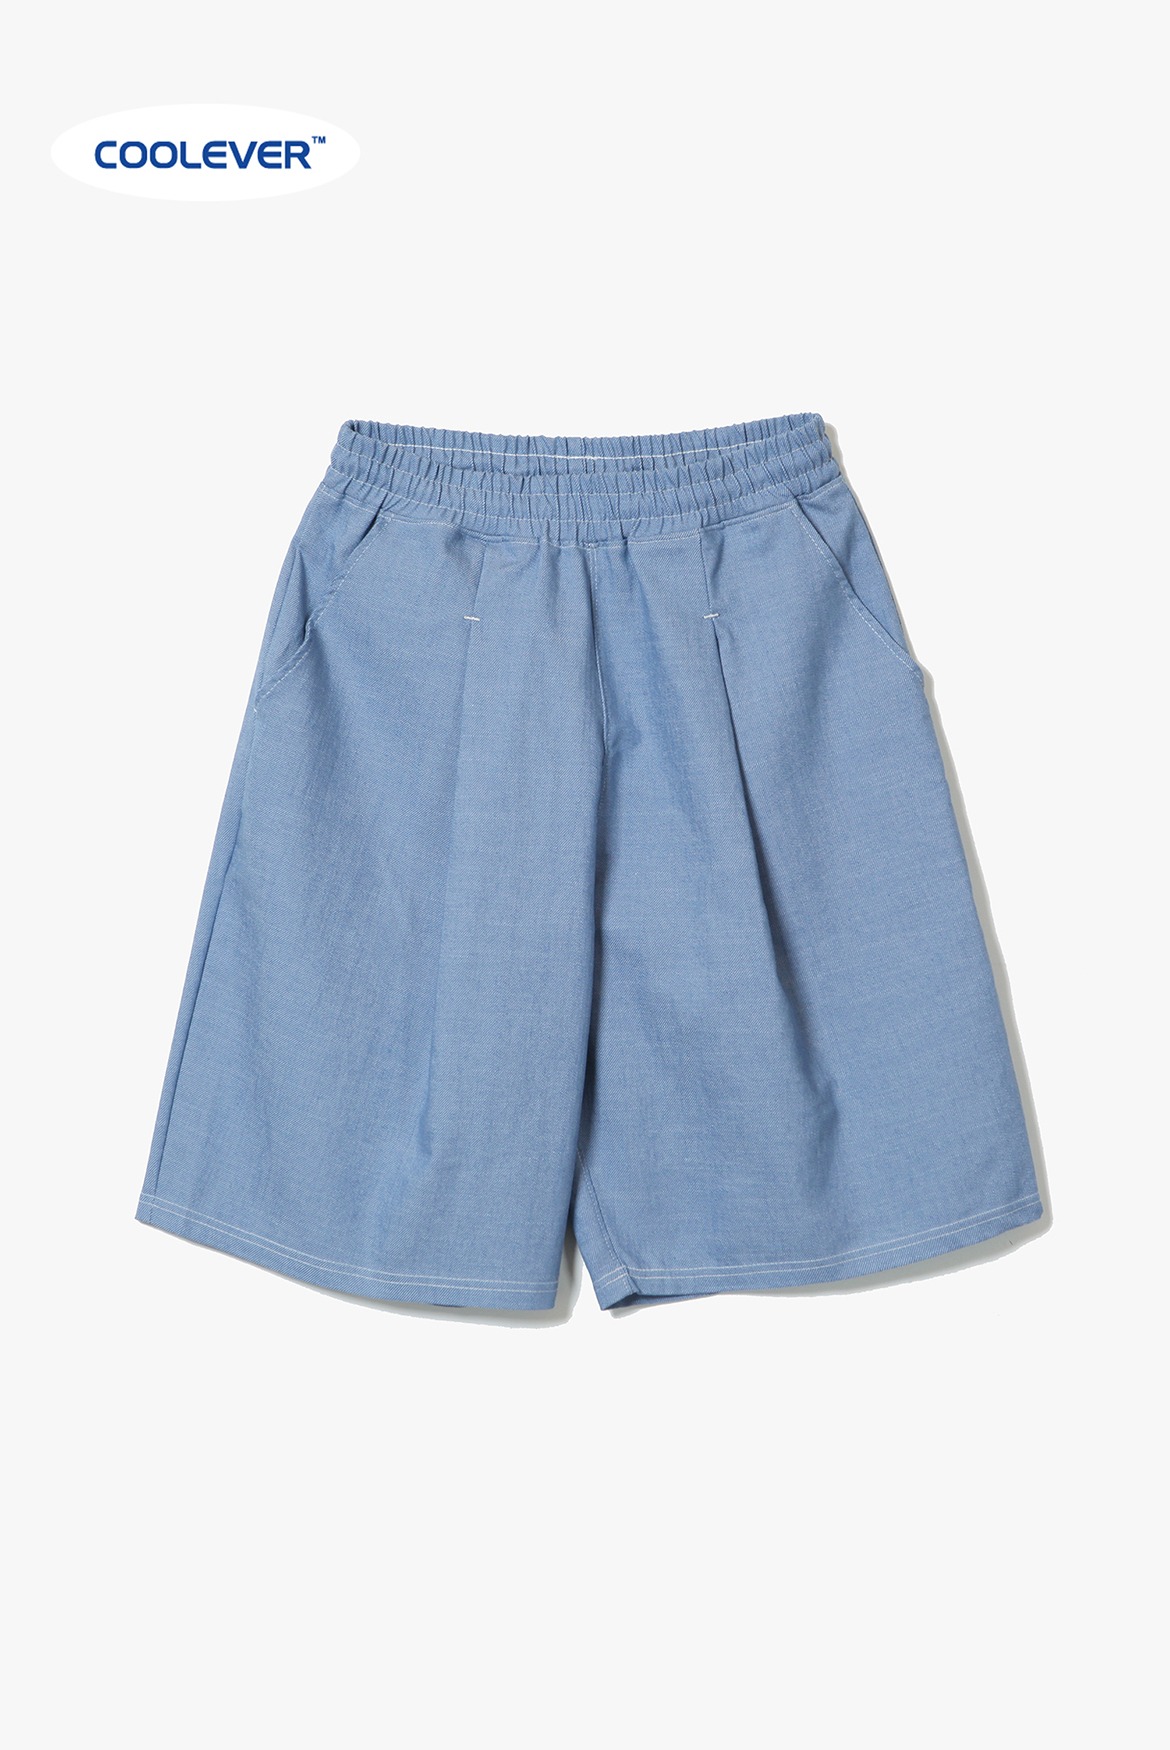 Clean Coolever Tuck Banding Shorts [Light Blue]